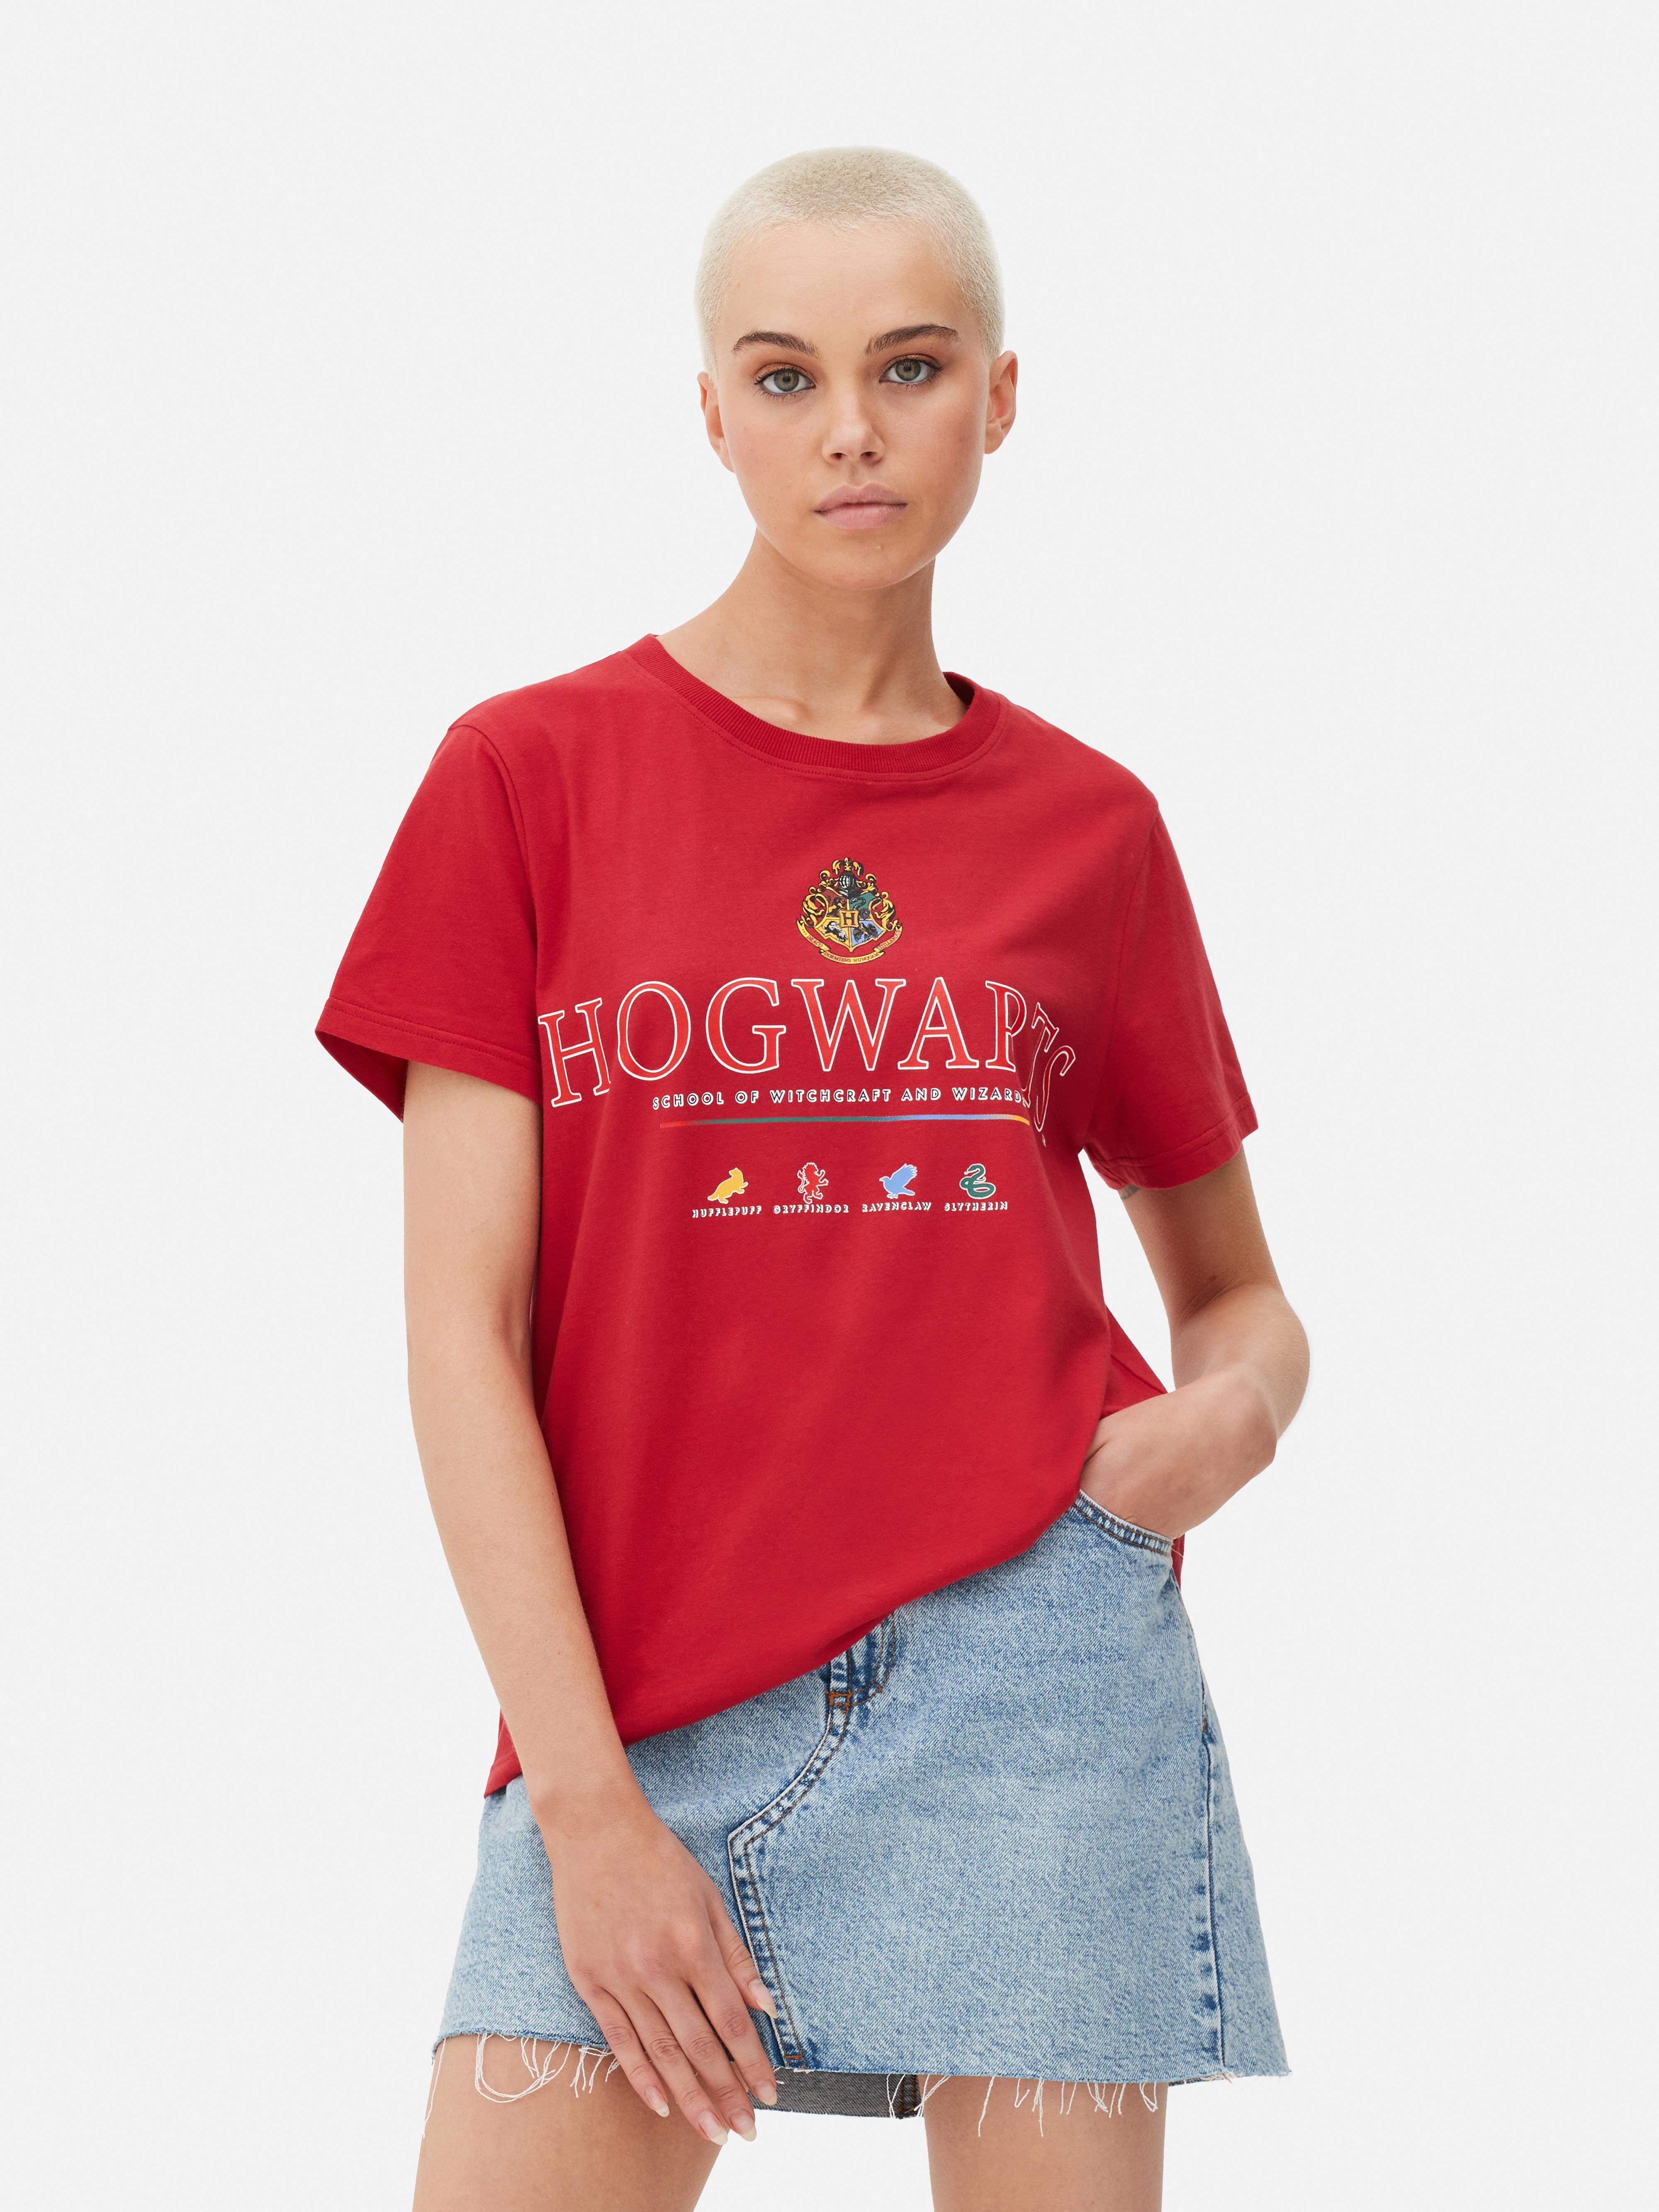 SALE!!! Harry Potter Women's Primark Clothing ALL ITEMS UNDER £15